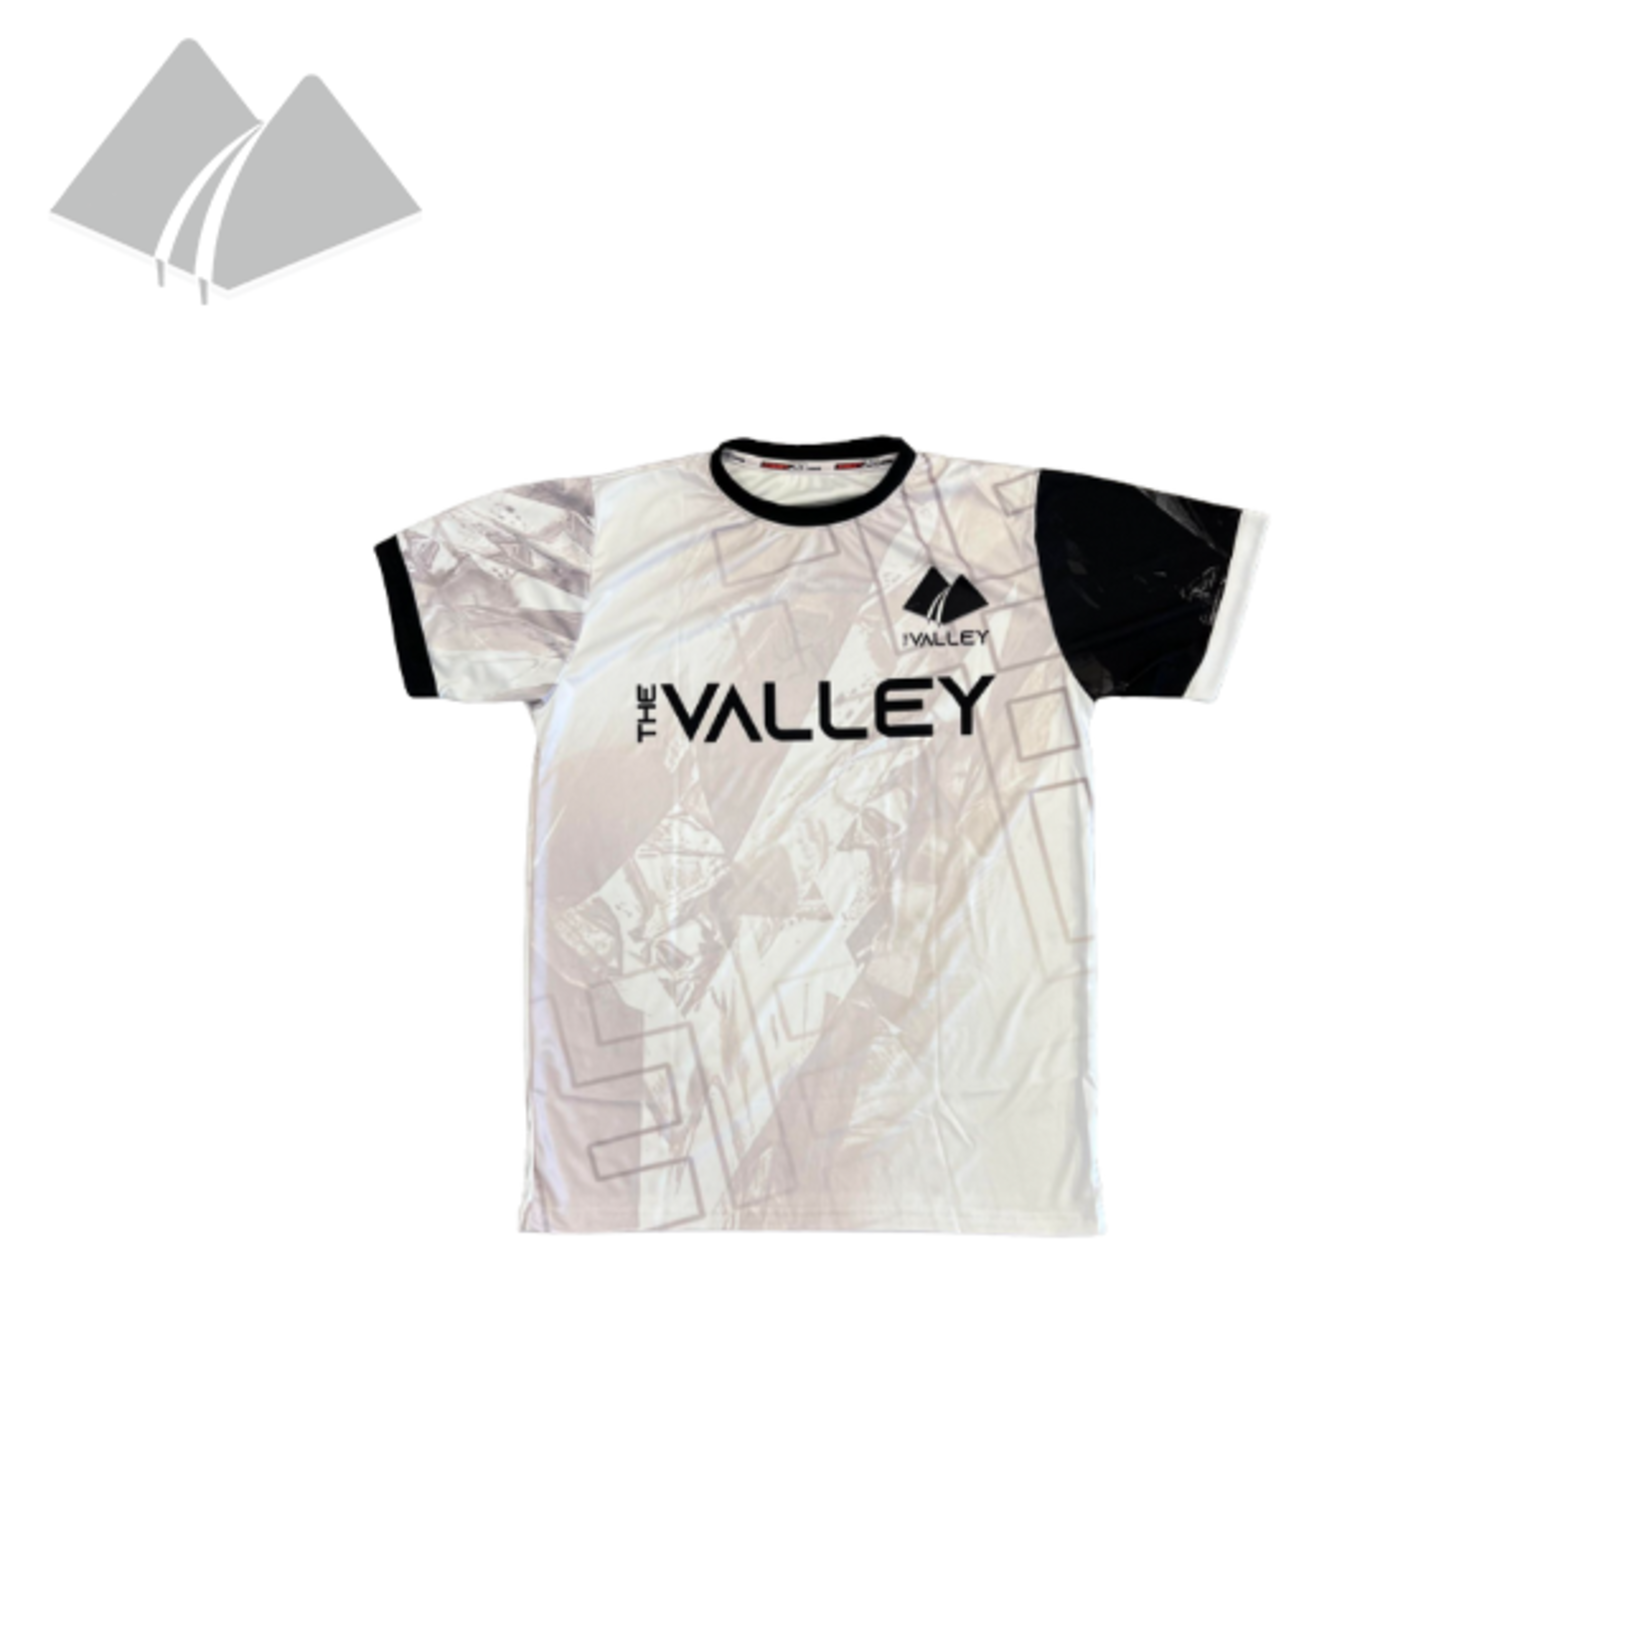 The Valley The Valley Jersey Tee FwydChickn White